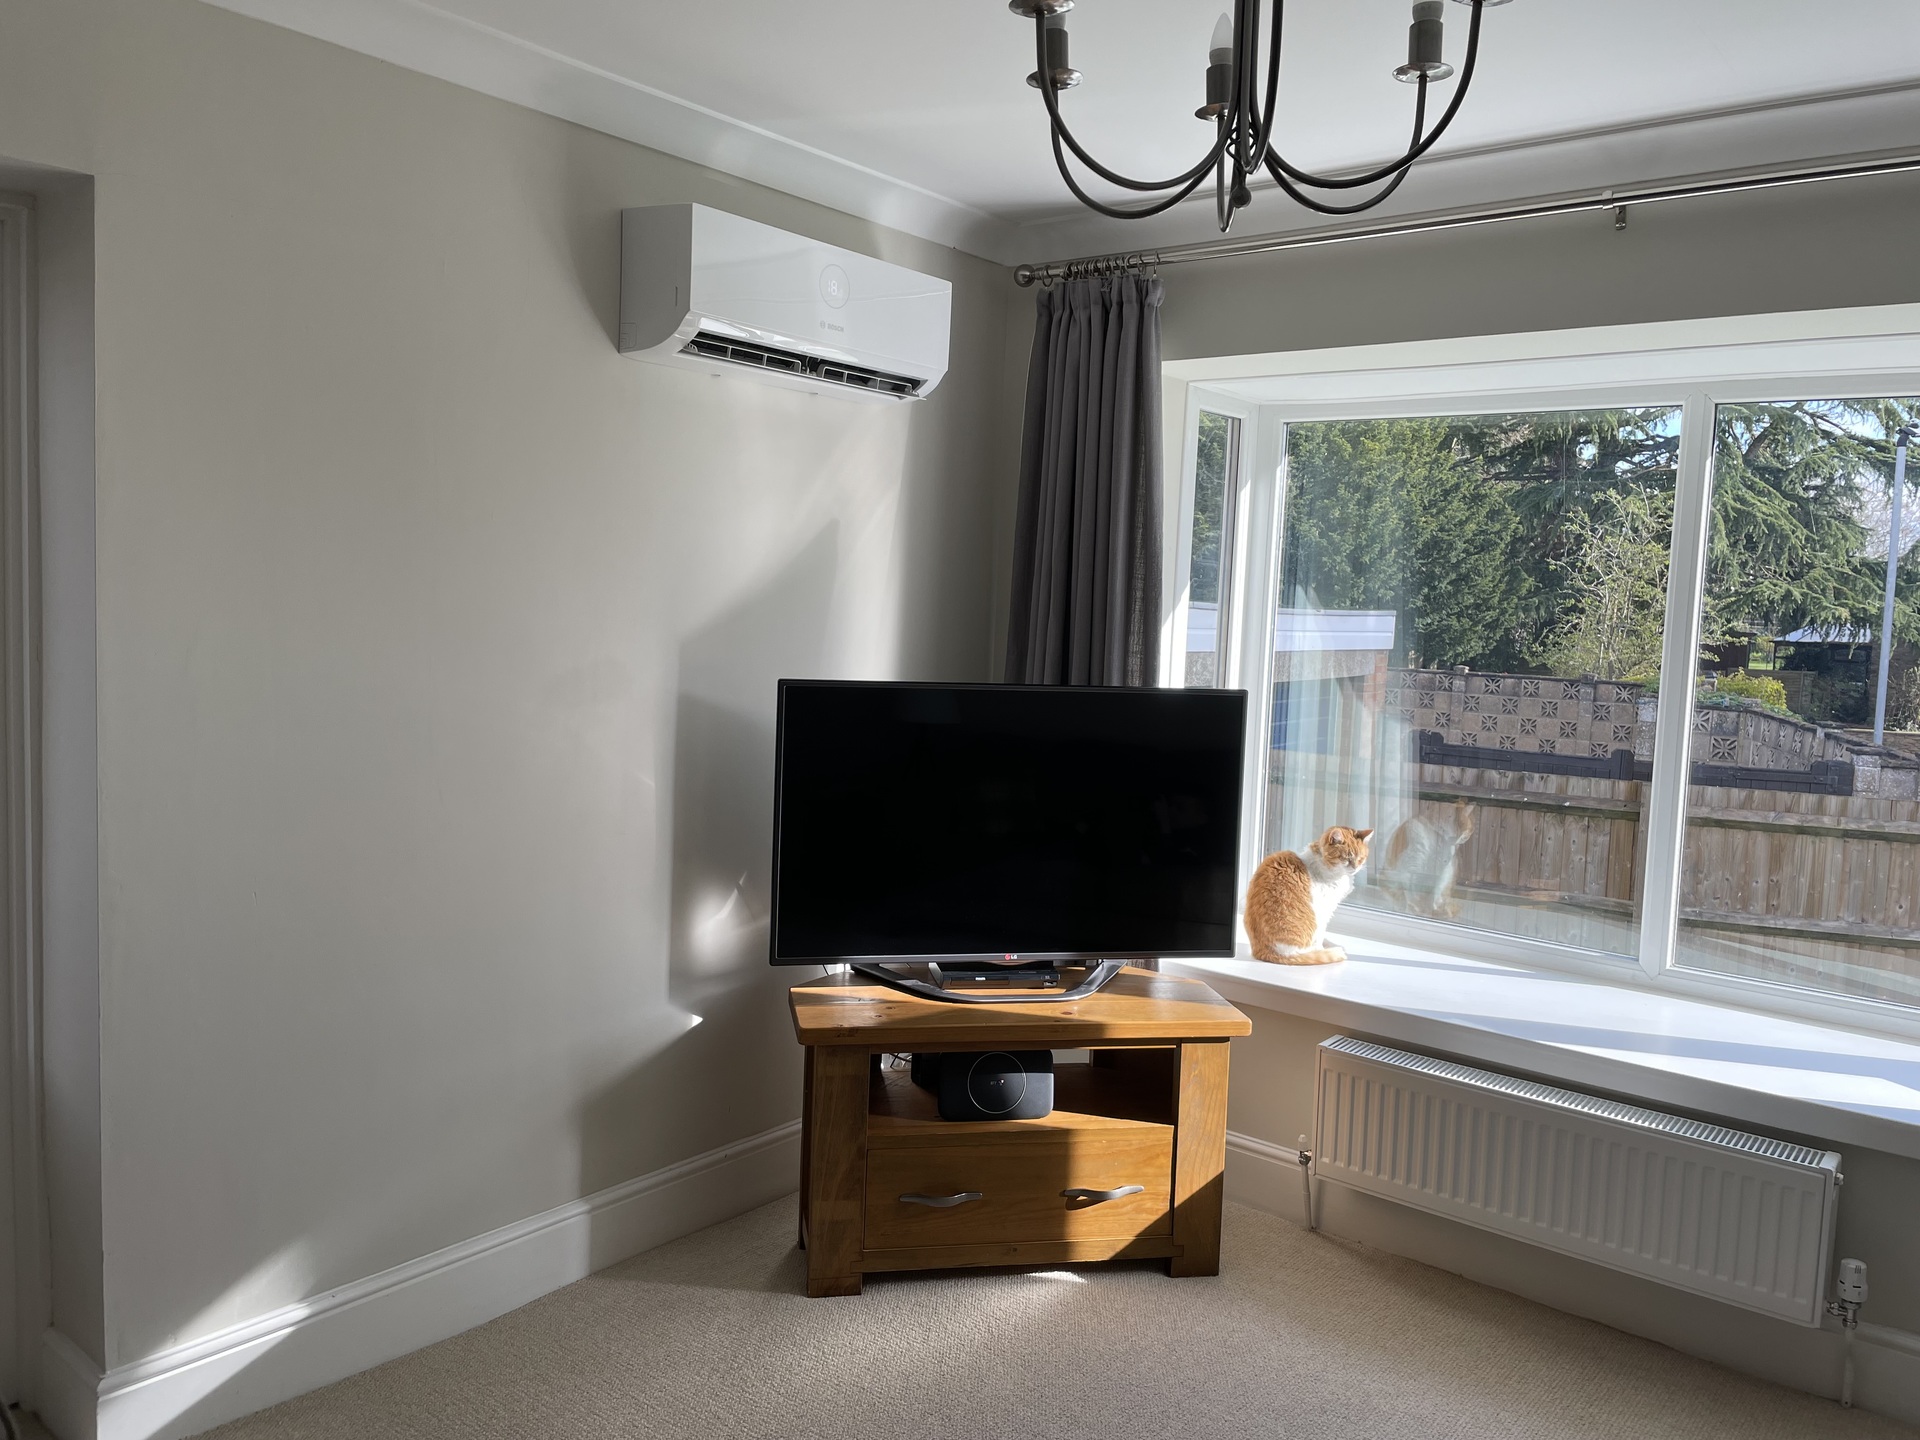 Worcester air conditioning installers Northampton